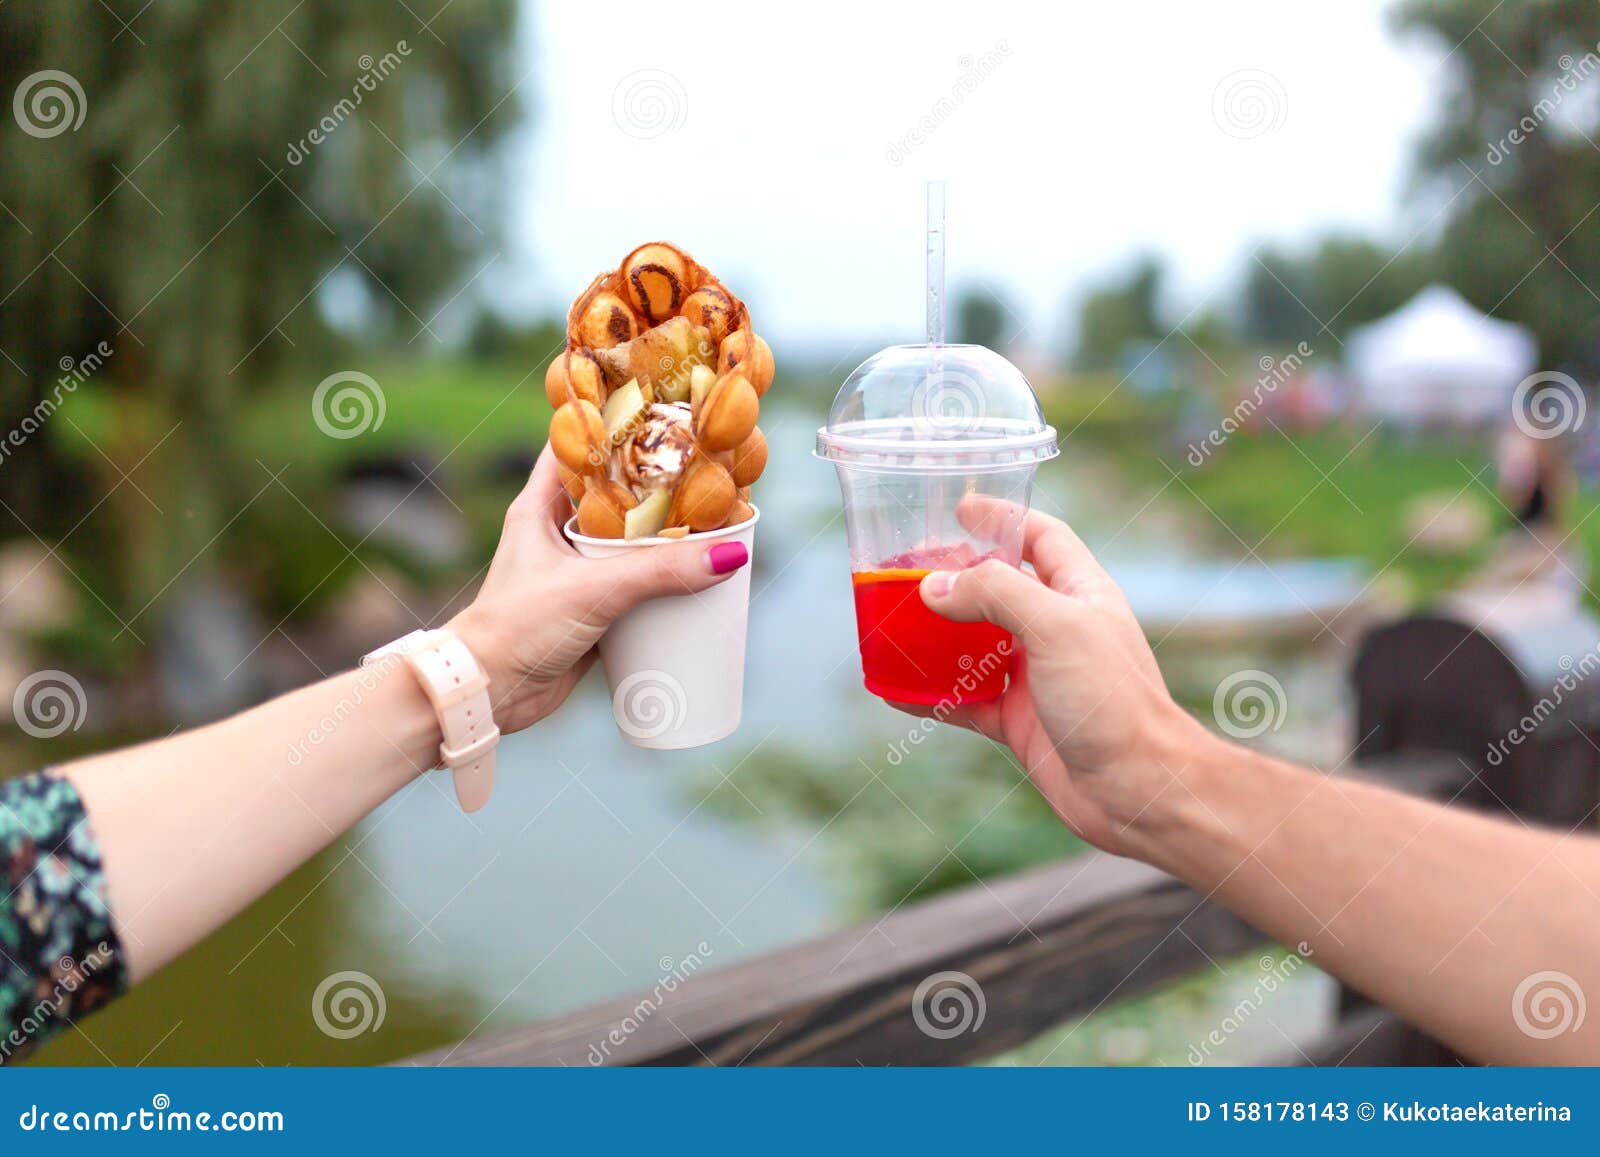 the girl and fella during the walk holds in hands a paper cup with a belgian waffle and fresh drink on a background of green park